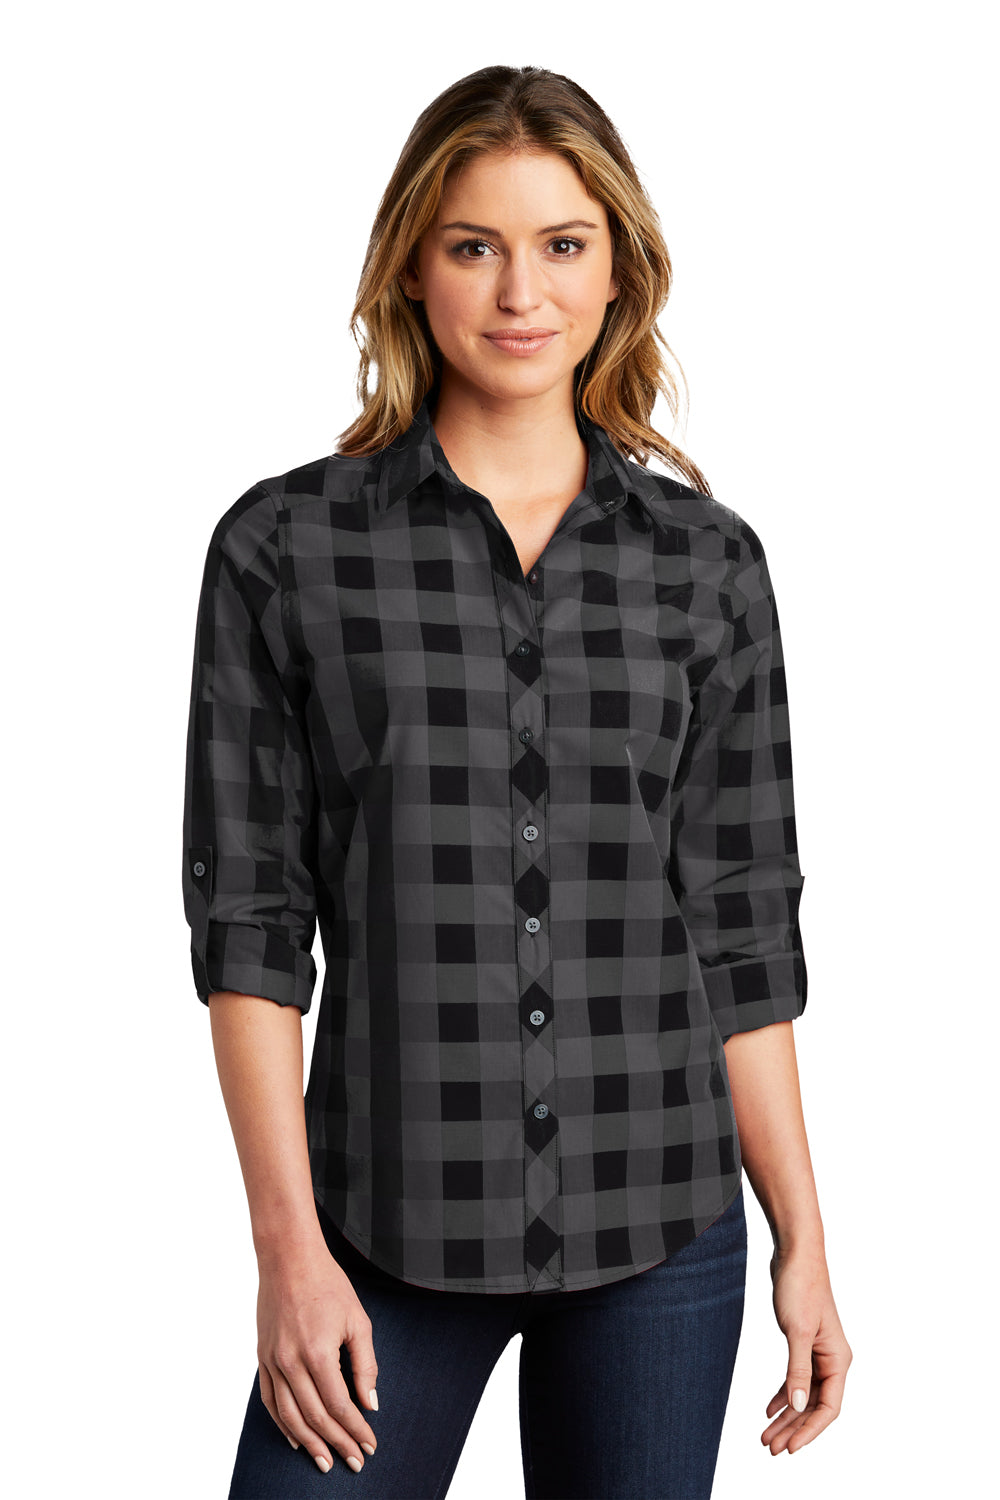 Port Authority Womens Everyday Plaid Long Sleeve Button Down Shirt Black Front